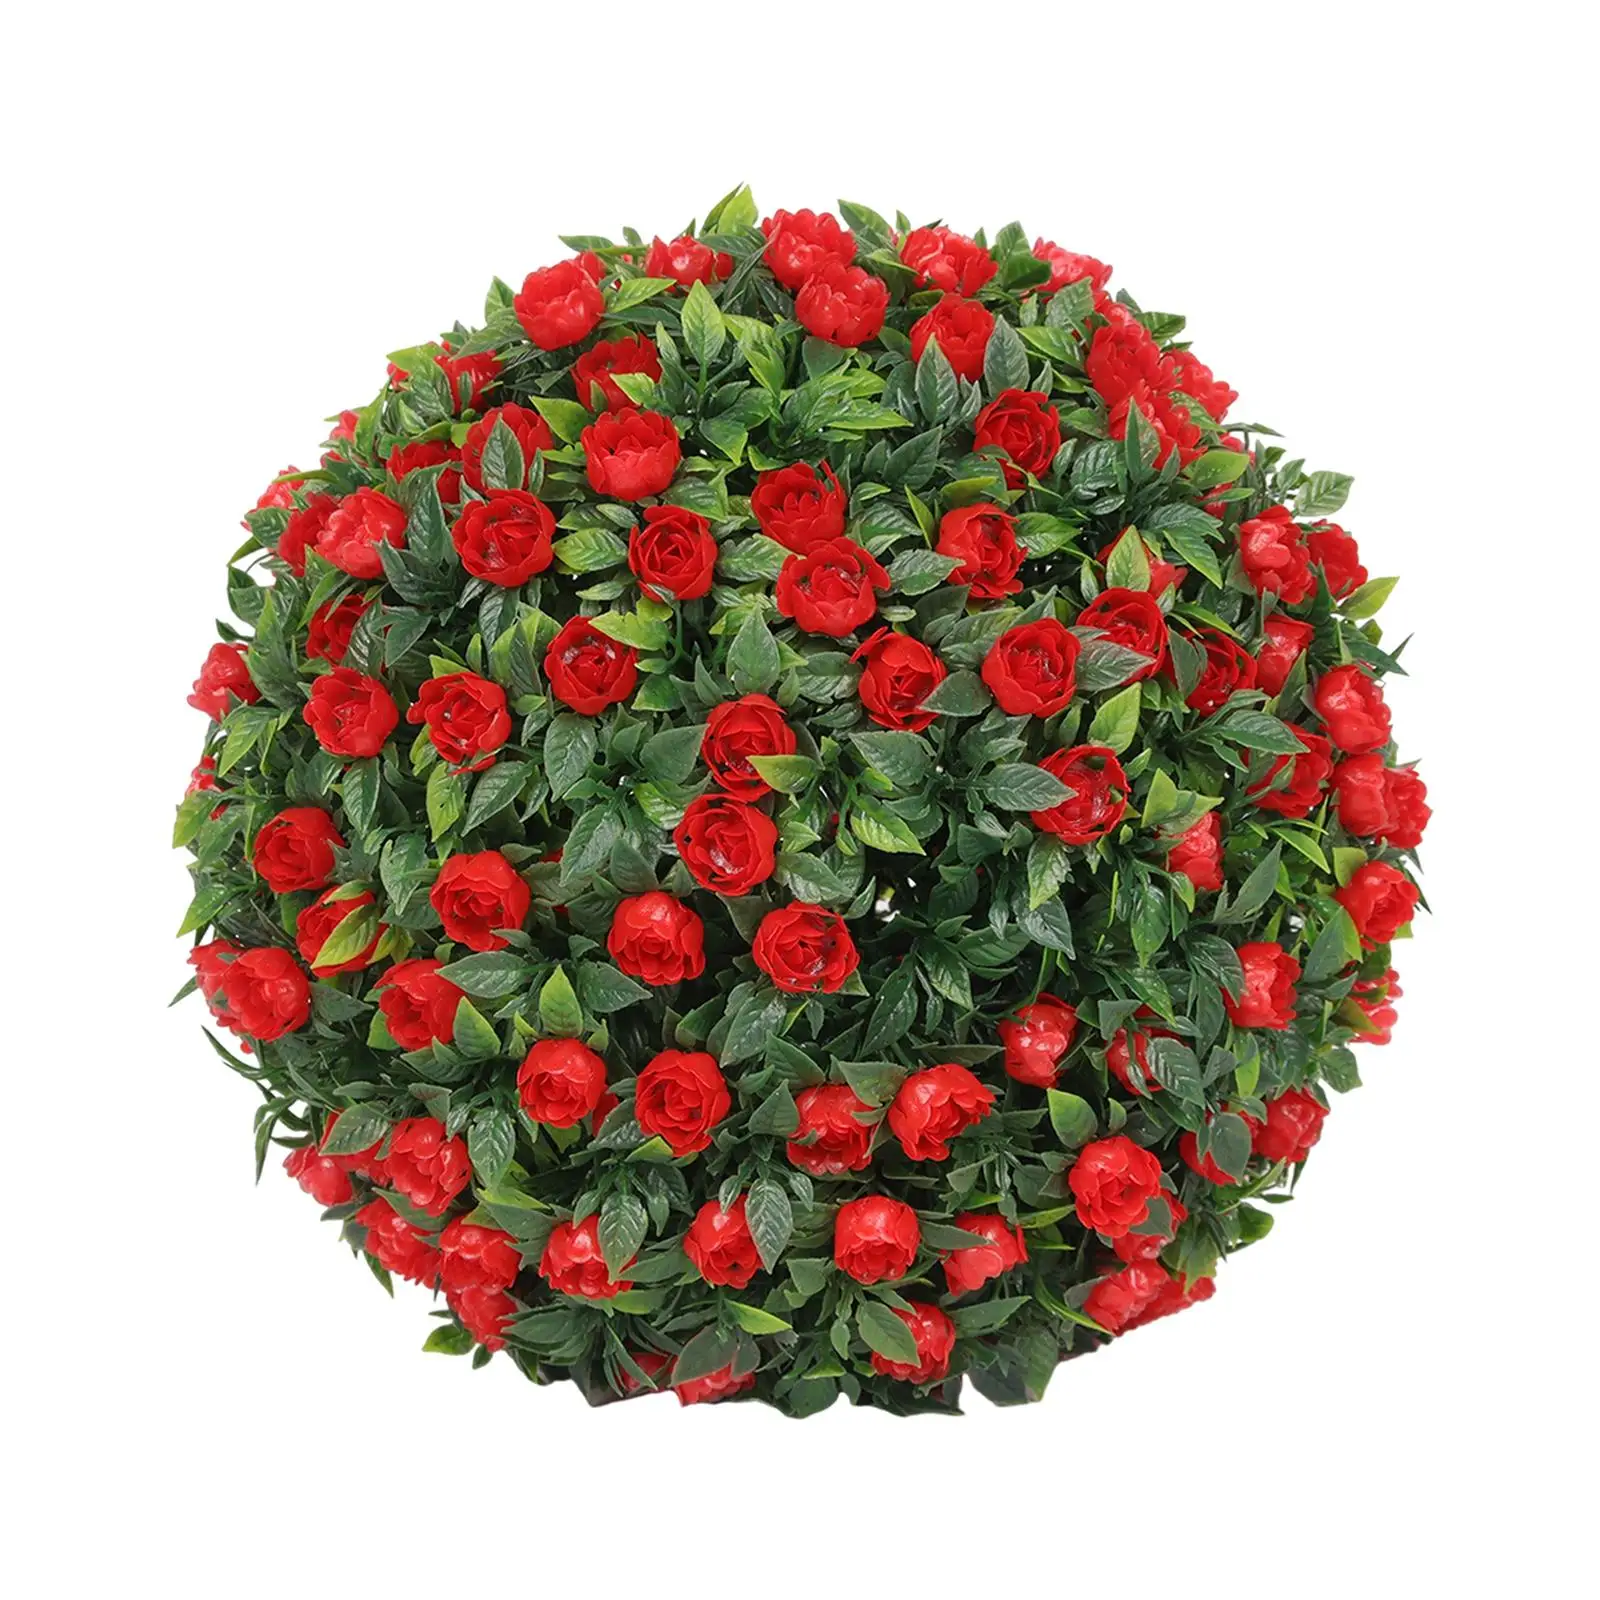 Simulation Plant Flower Hanging Topiary Ball 7.8inch Sturdy Convenient Assemble Versatile Floral Decoration for Outdoor Patio